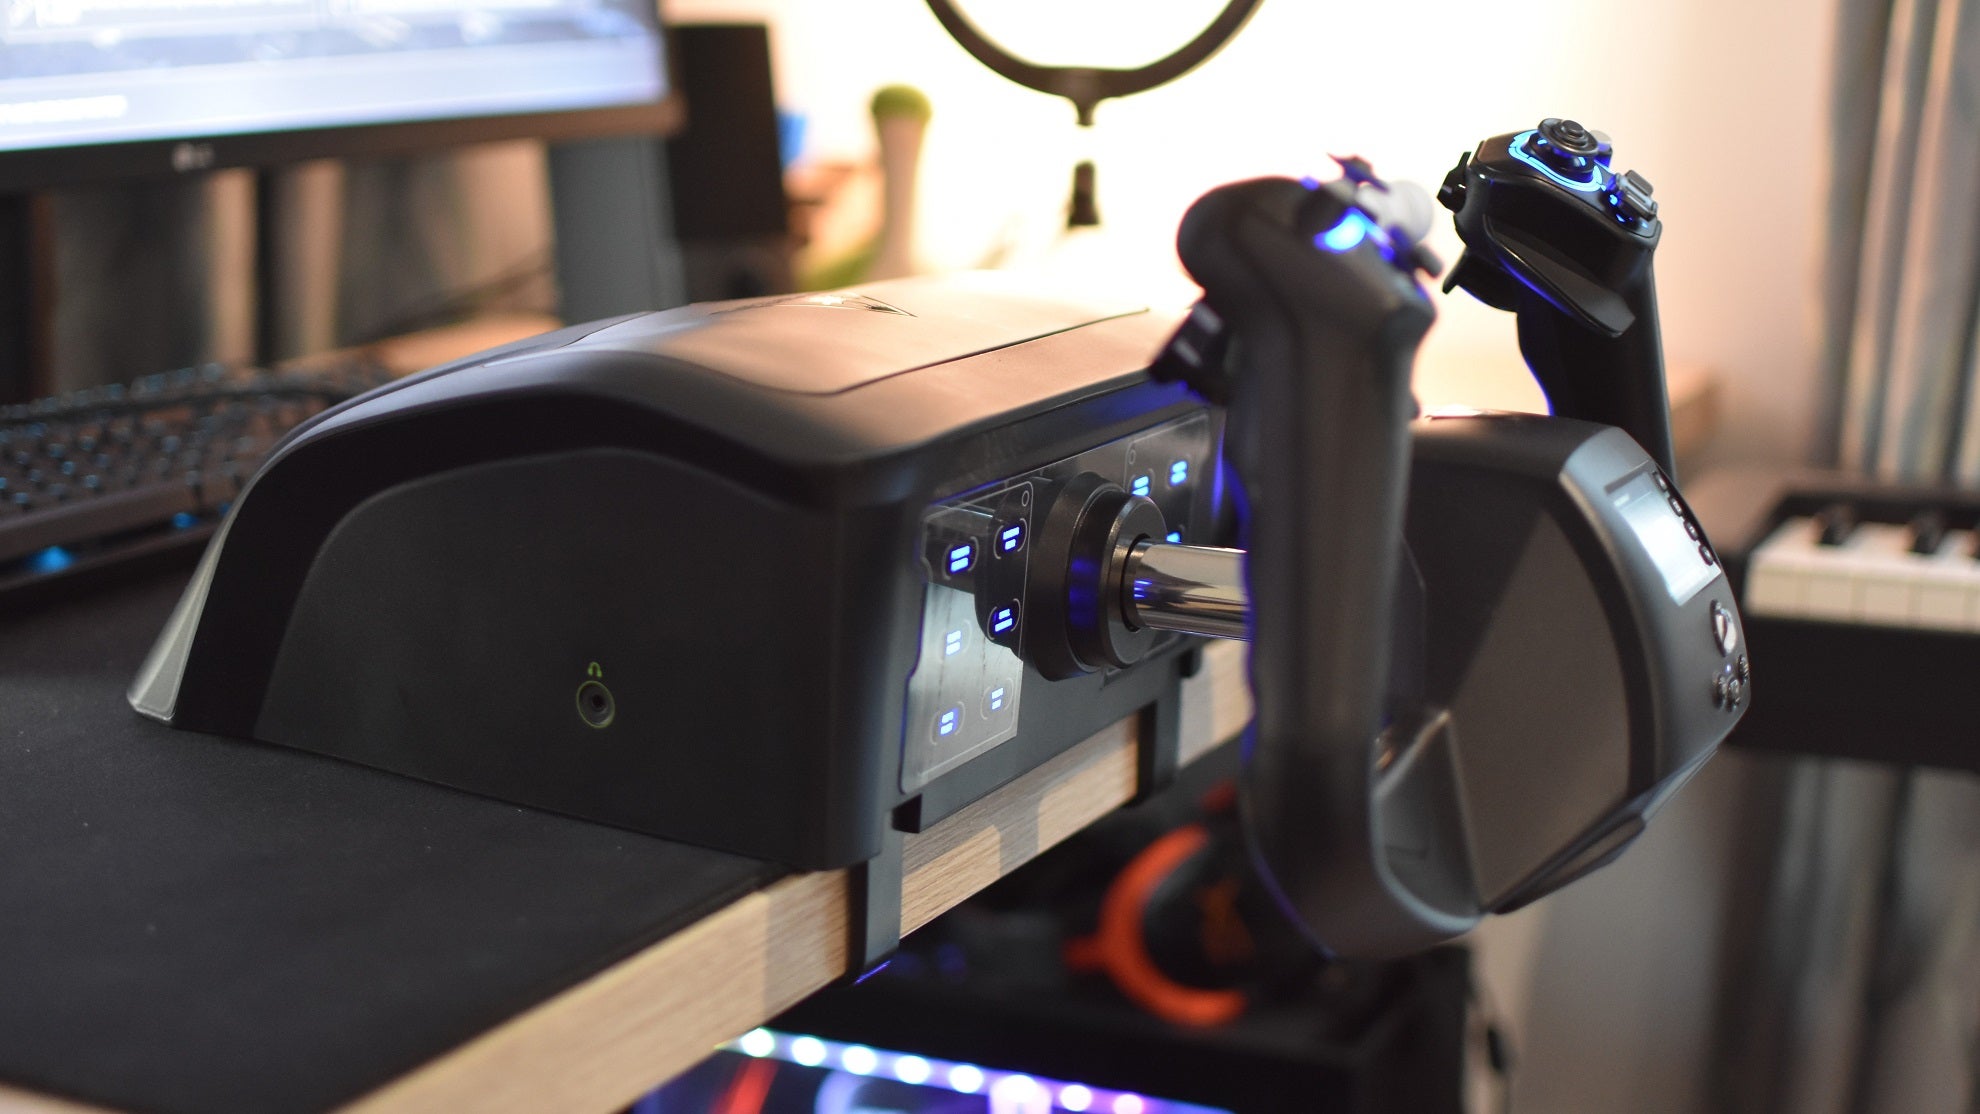 A side view of the the Turtle Beach VelocityOne Flight controller on a desk.